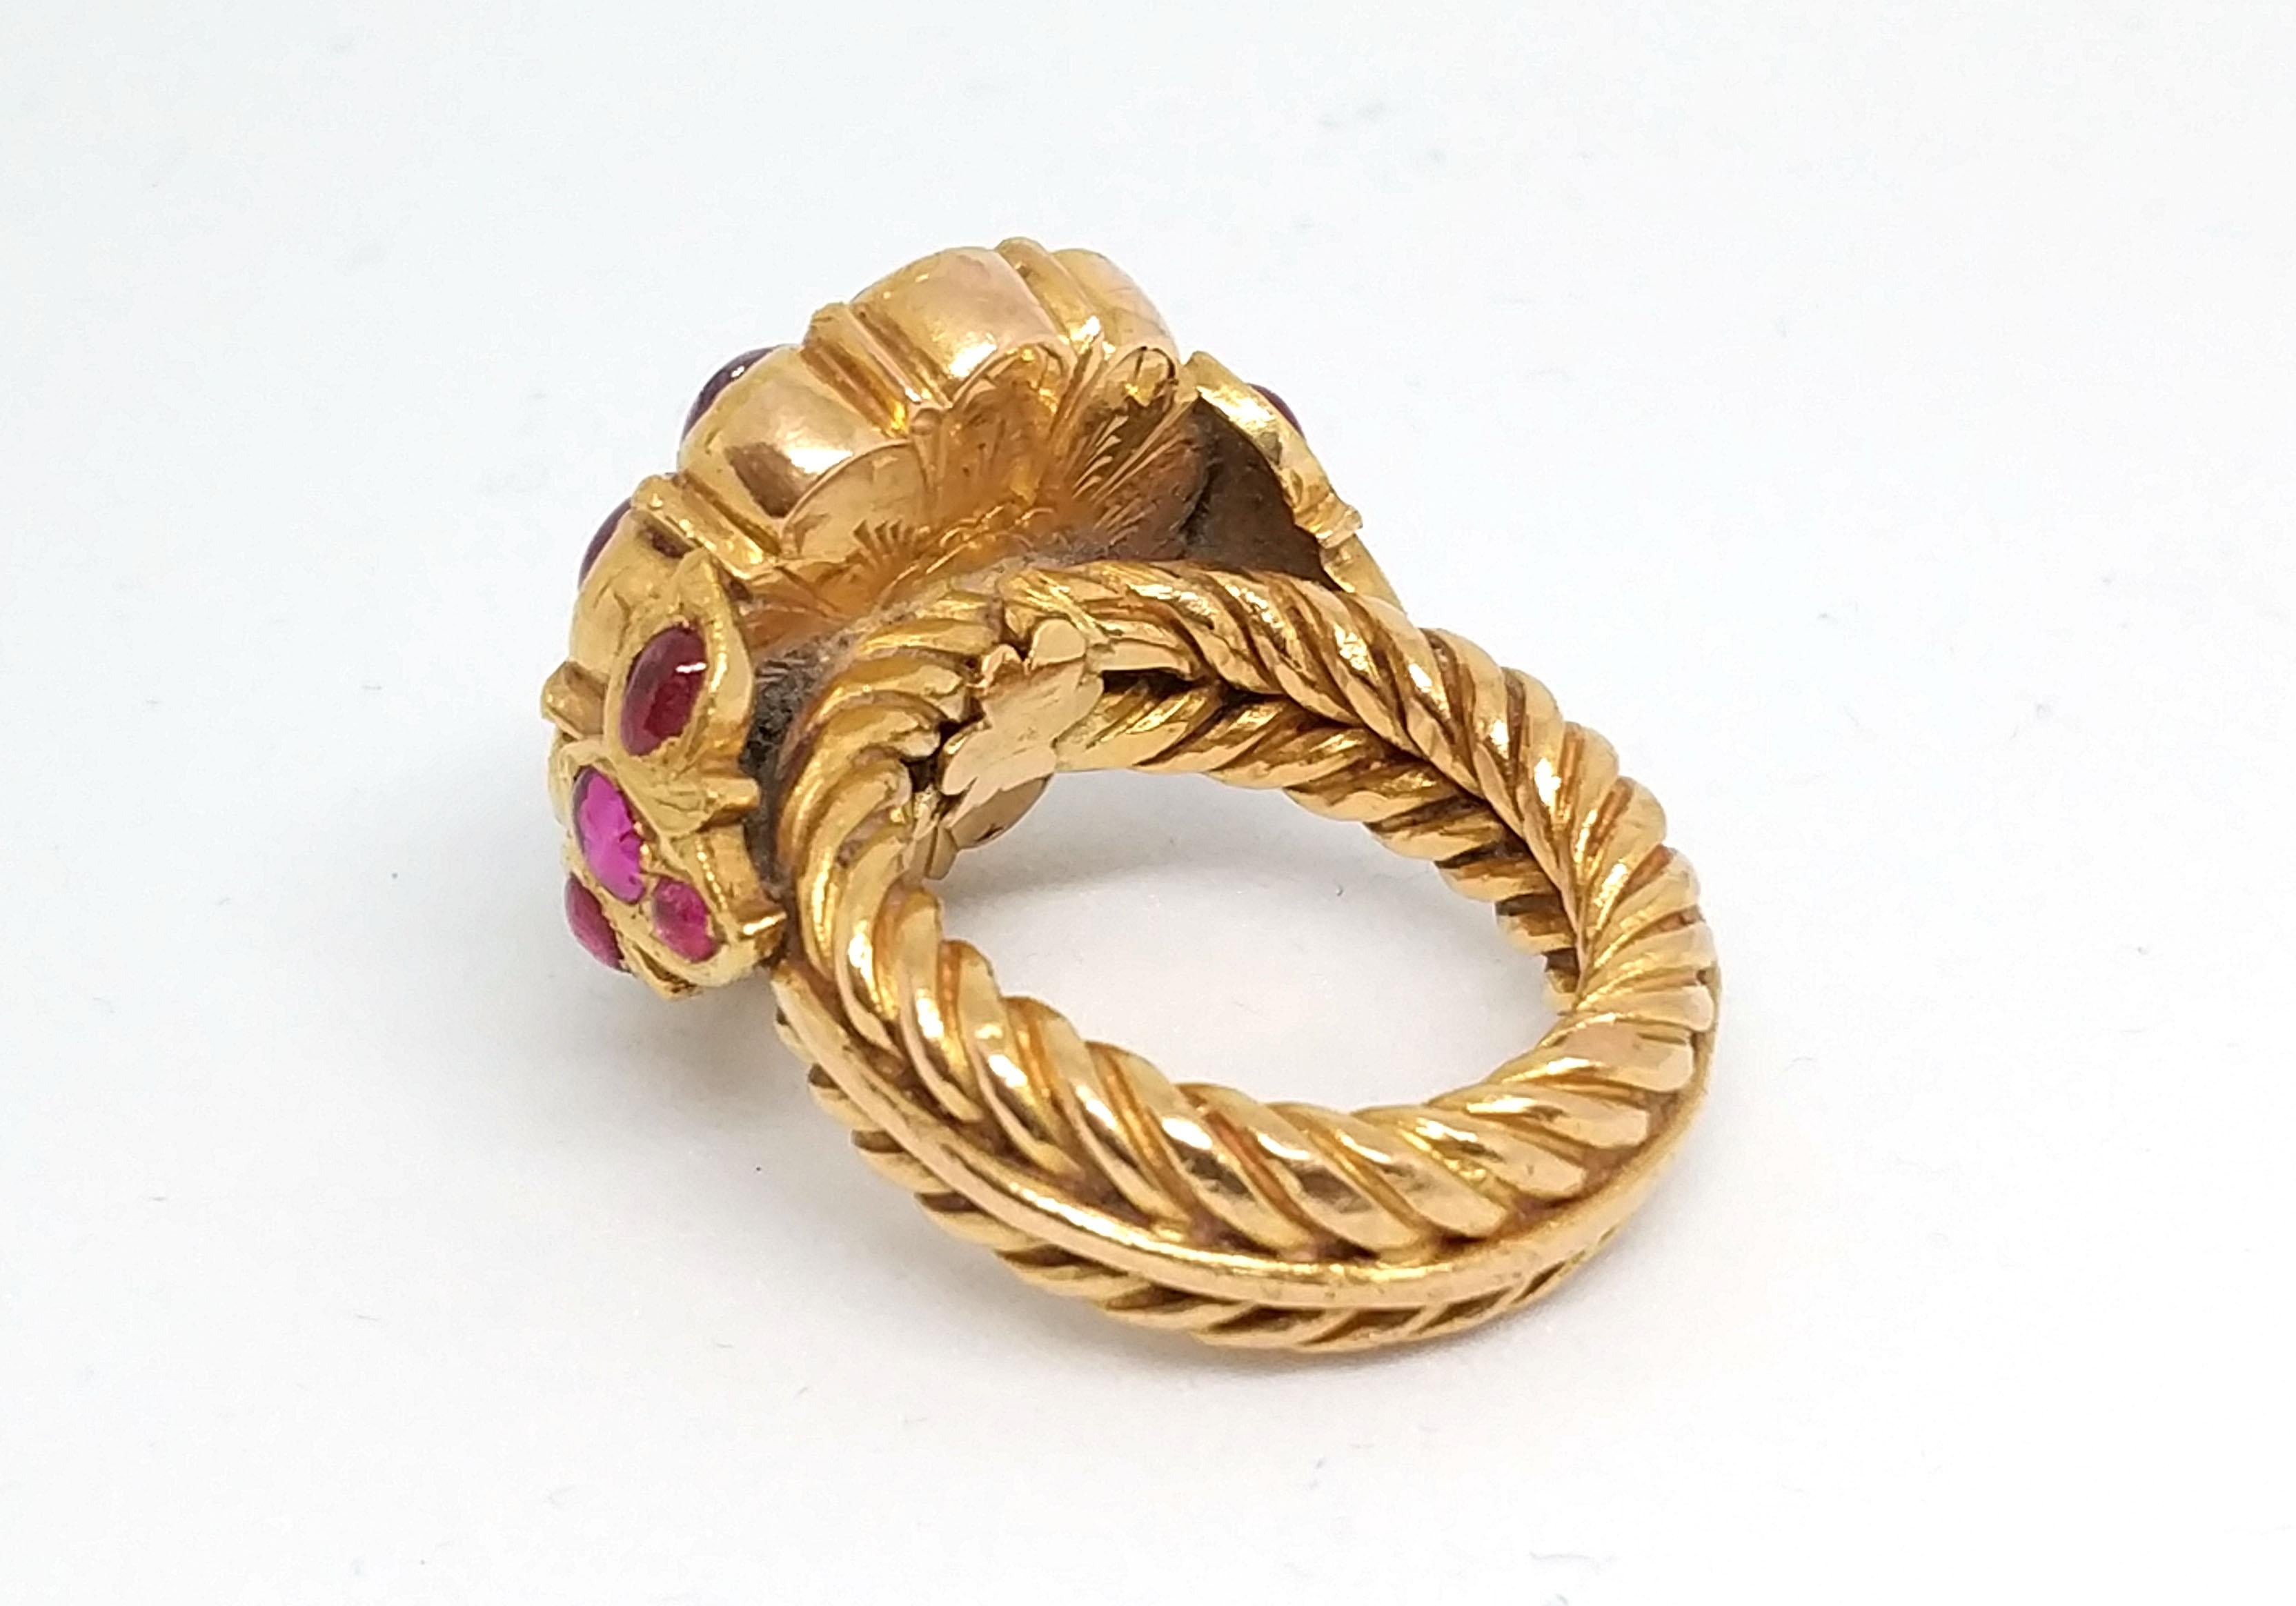 Antique Royal 5.5 carat Ruby and 3 carat Emerald Ring in 23 Carat Gold In Excellent Condition For Sale In London, GB